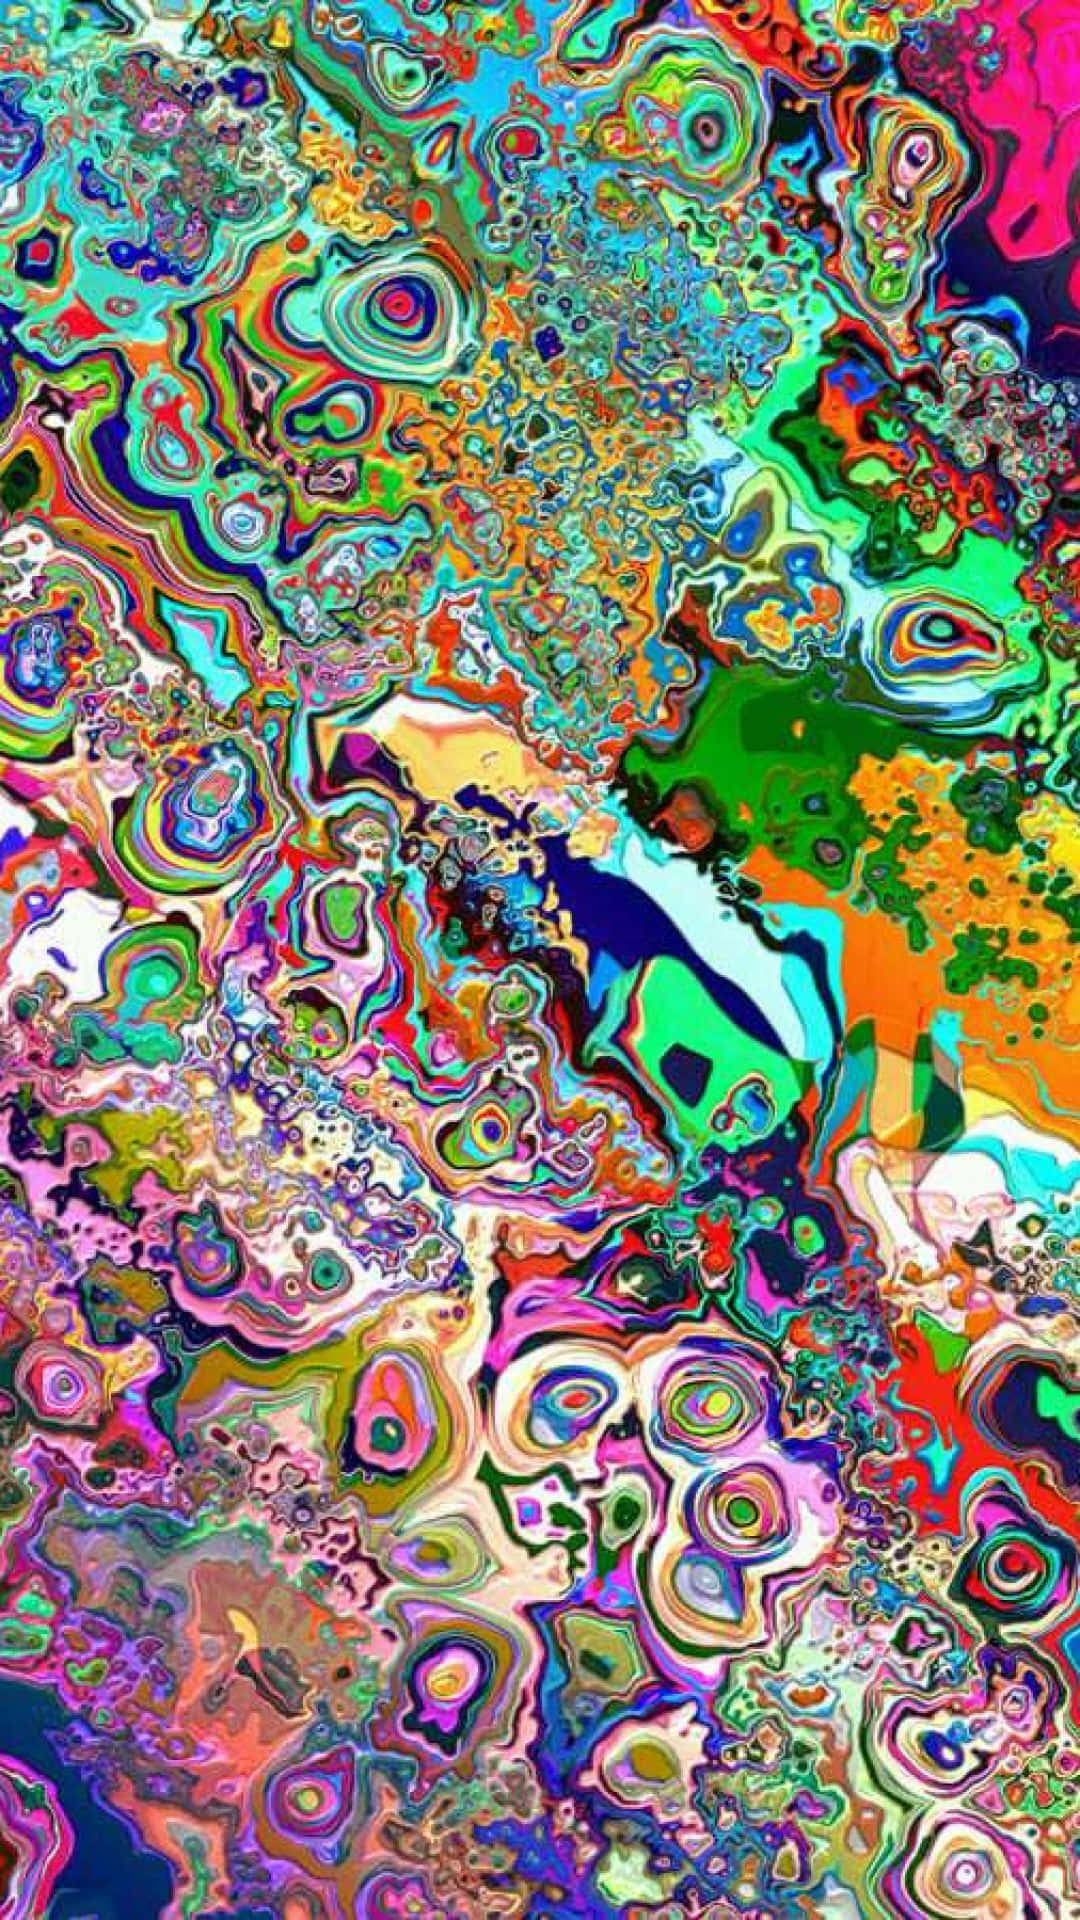 "A colorful and mesmerizing digital artwork from the artist Trippy Stoner" Wallpaper